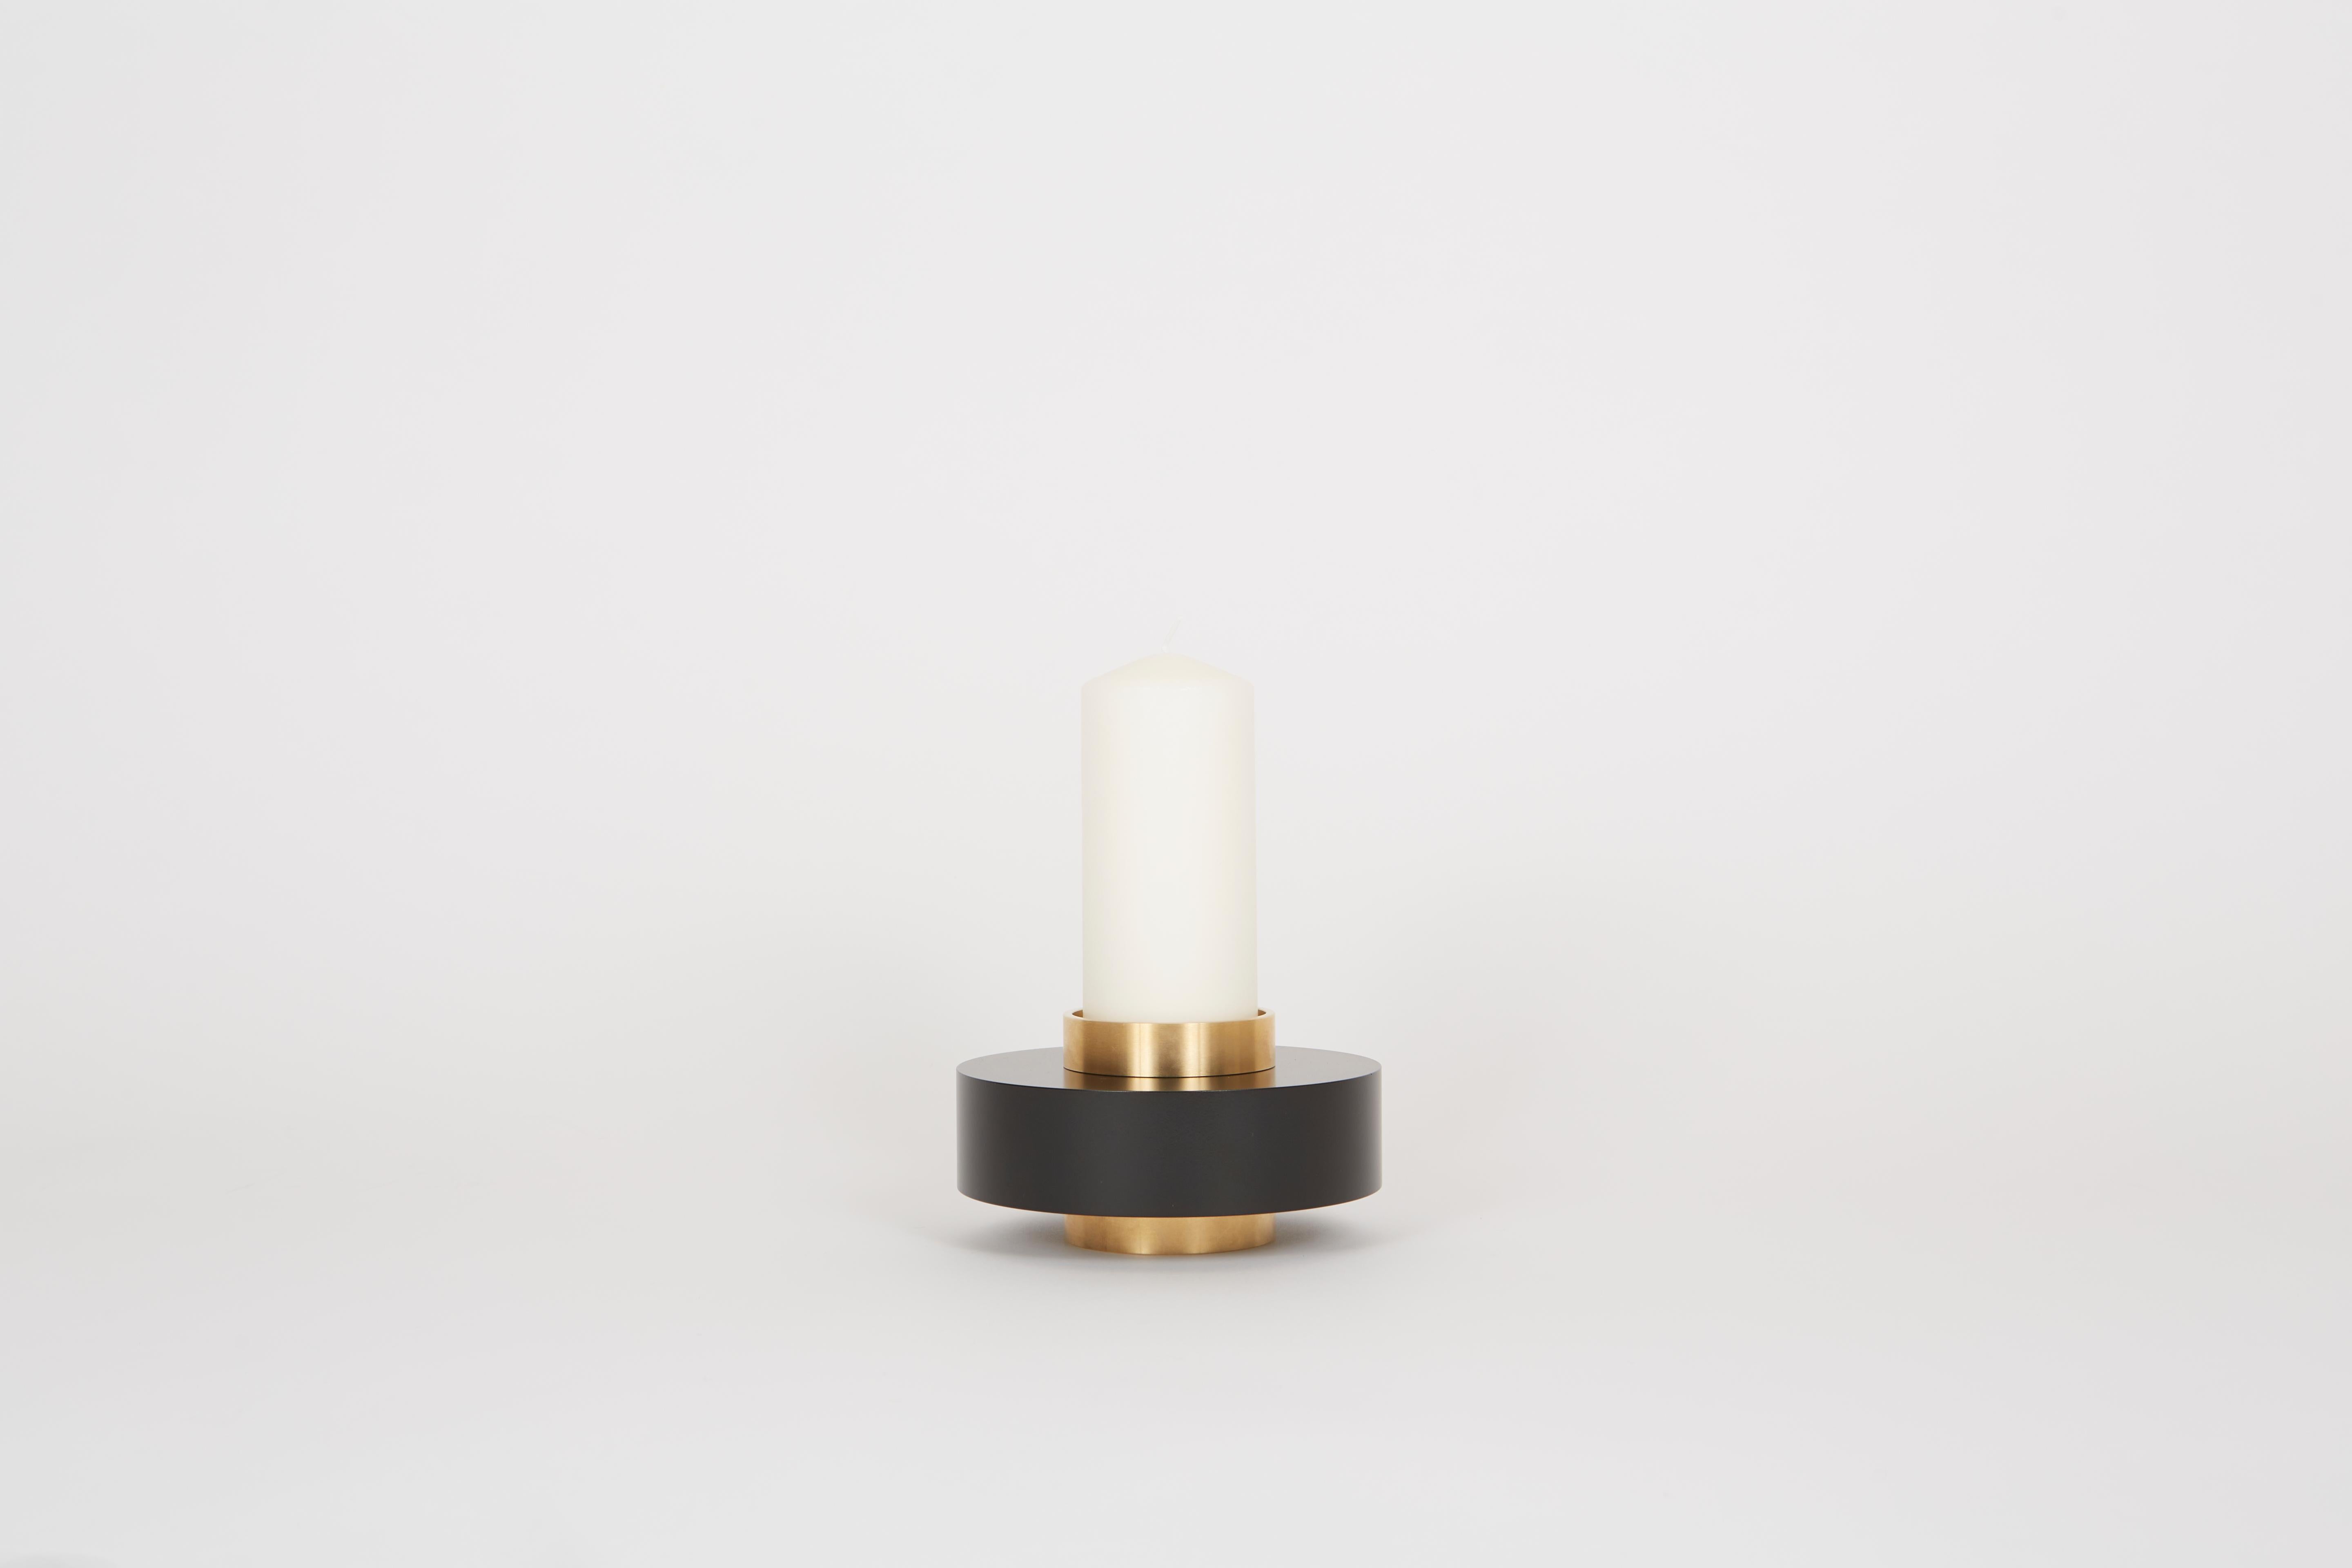 The iconic candle holders are created in our workshop in Paris from materials such as brass and solid aluminum.